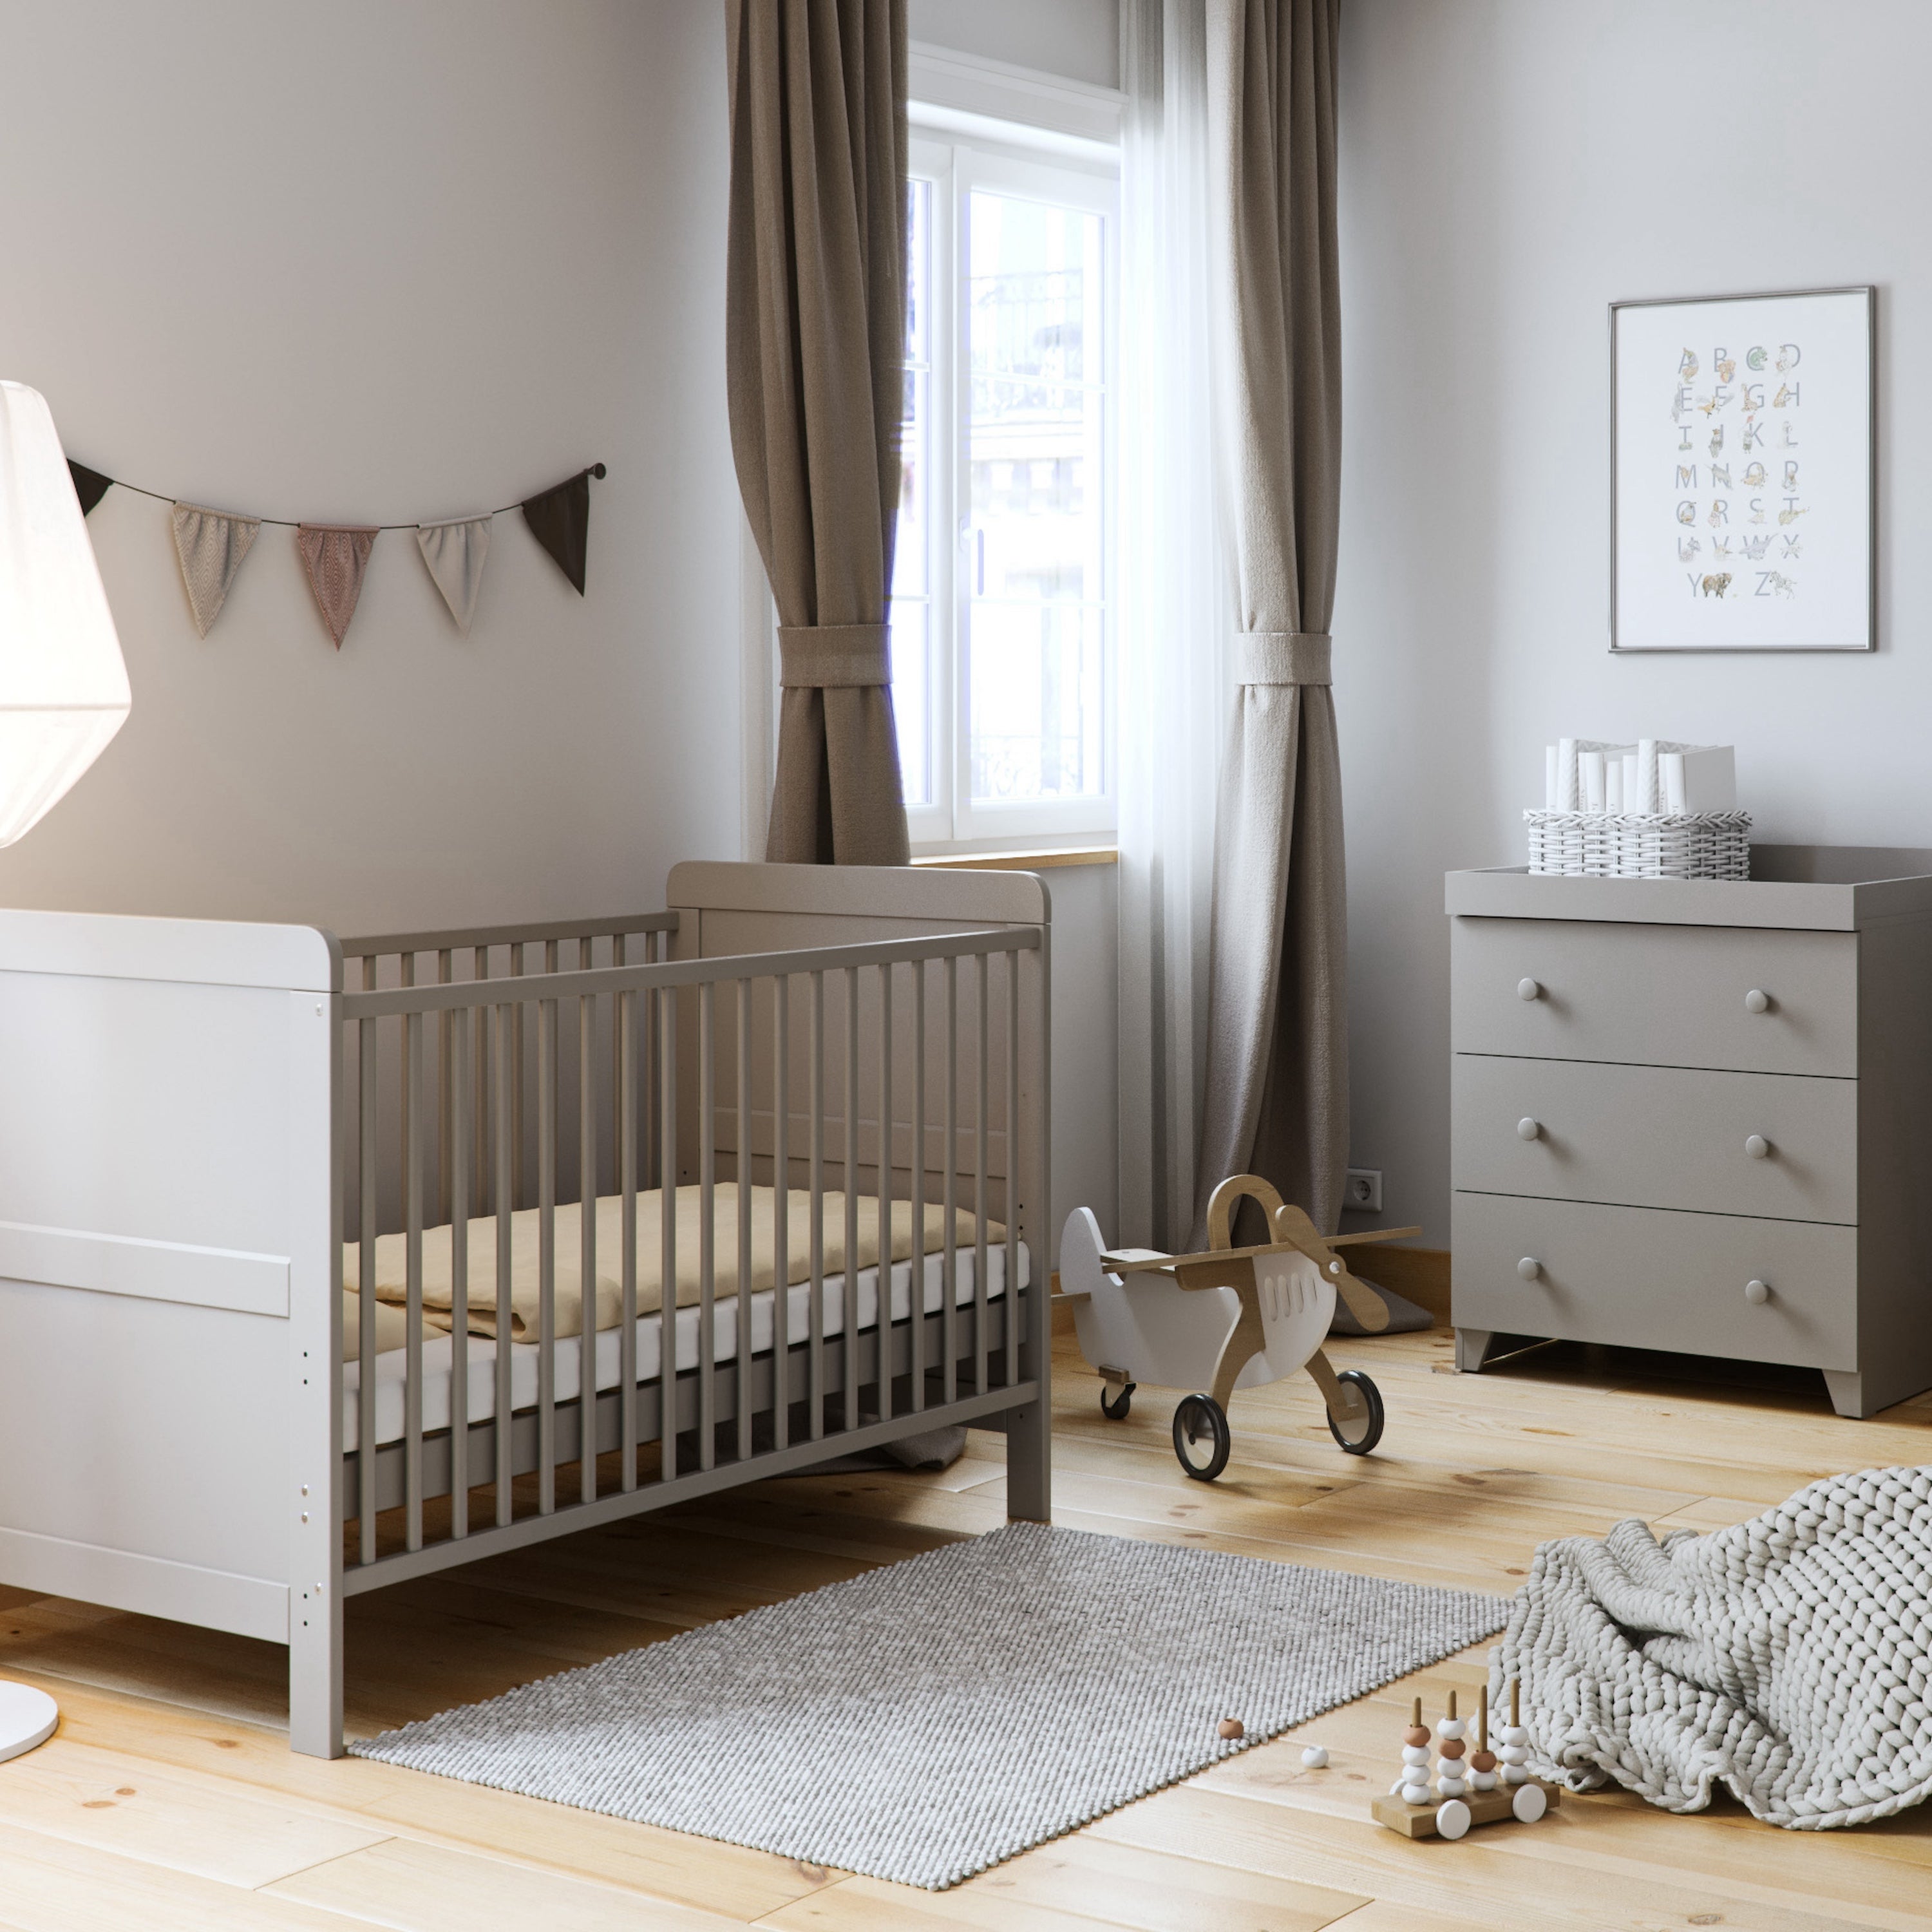 Little Acorns Classic Cot Bed and 3 Drawer Chest Nursery Set